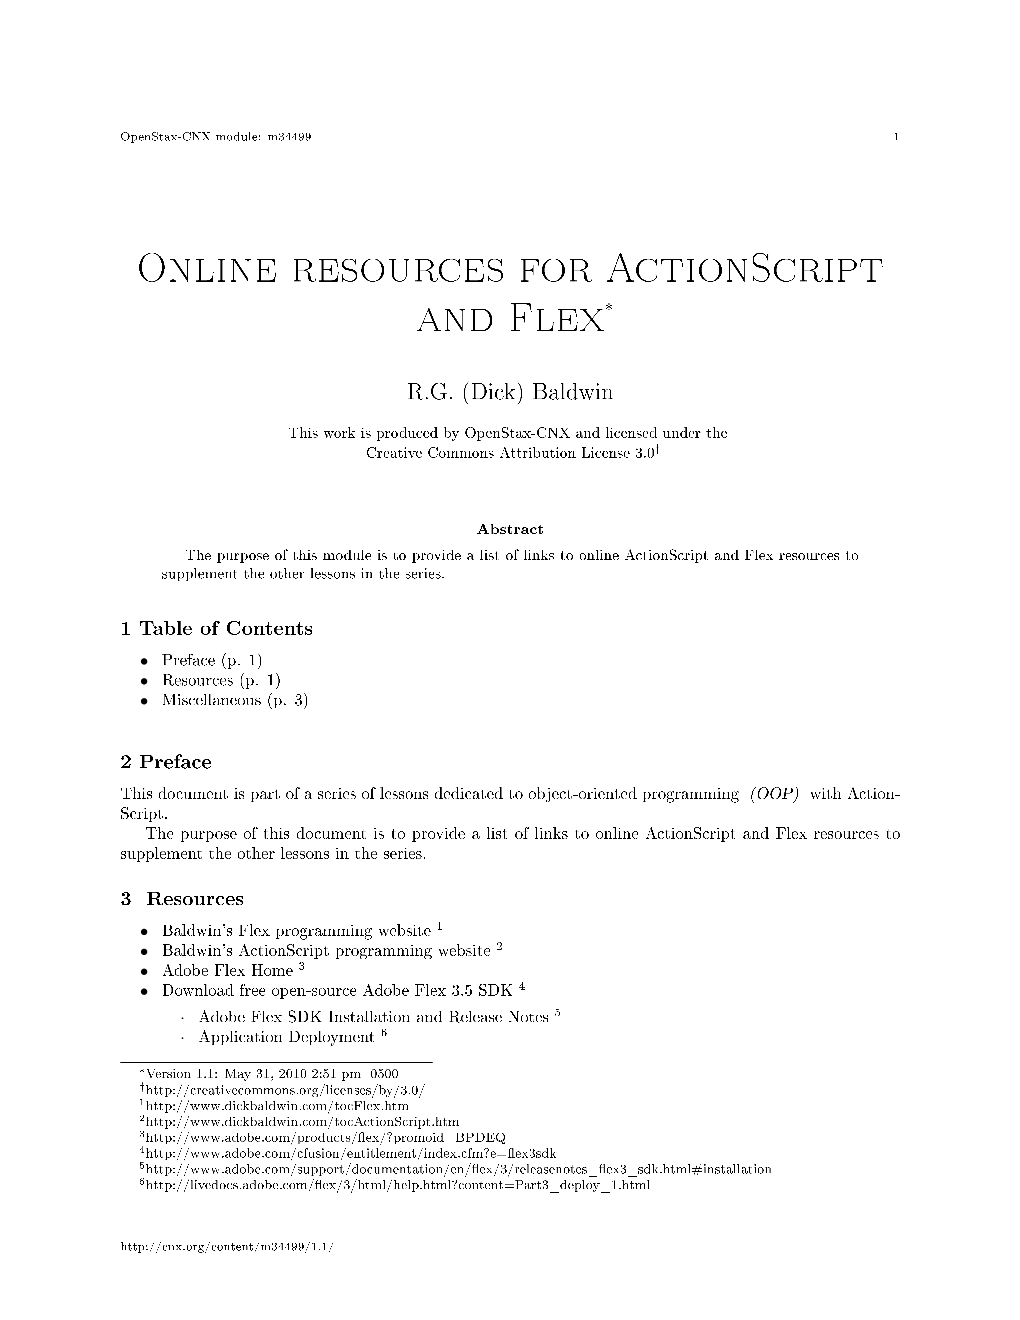 Online Resources for Actionscript and Flex*